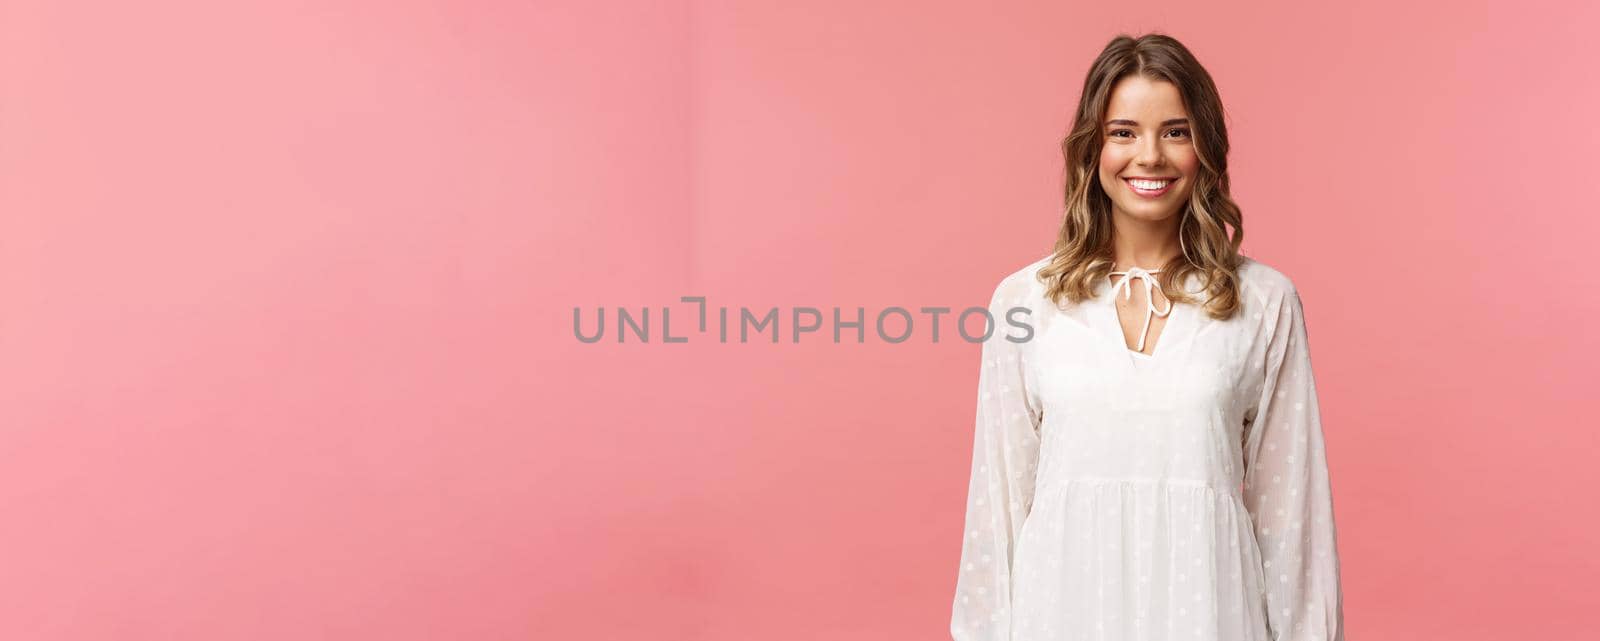 Spring, beauty and women concept. Portrait of tender feminine blonde girl with white beaming smile standing in light cute dress over pink background with happy attitude, positive emotions.